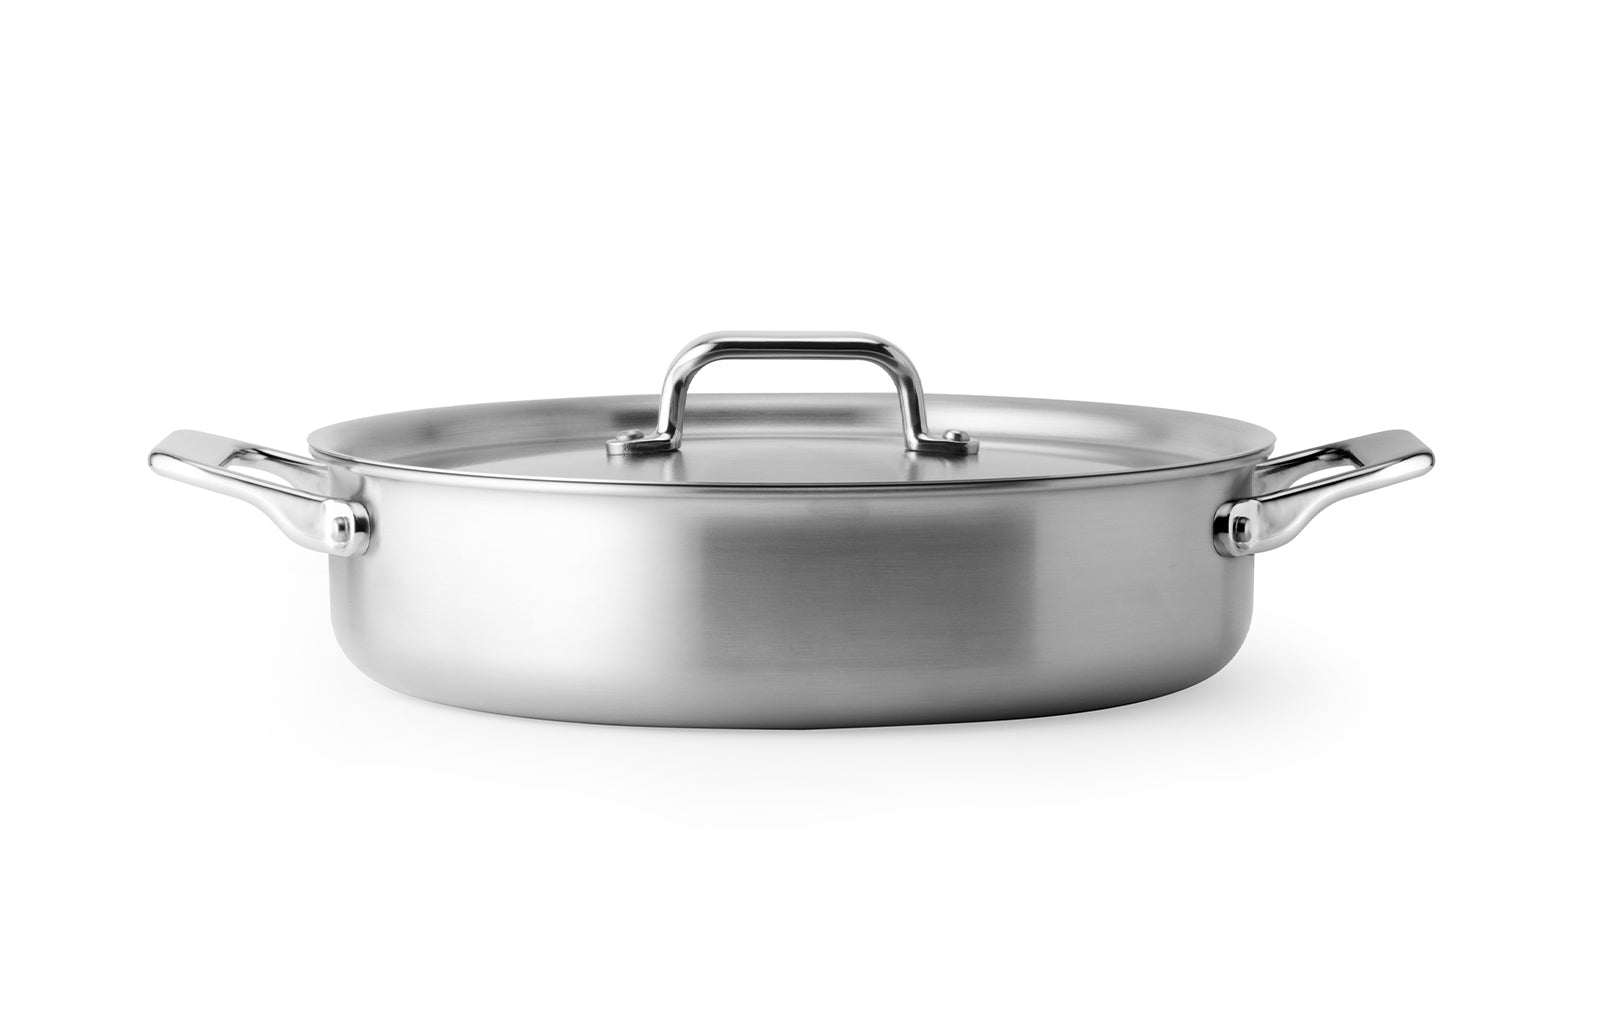 The Misen 6 QT Rondeau pan comes with a stainless steel lid.